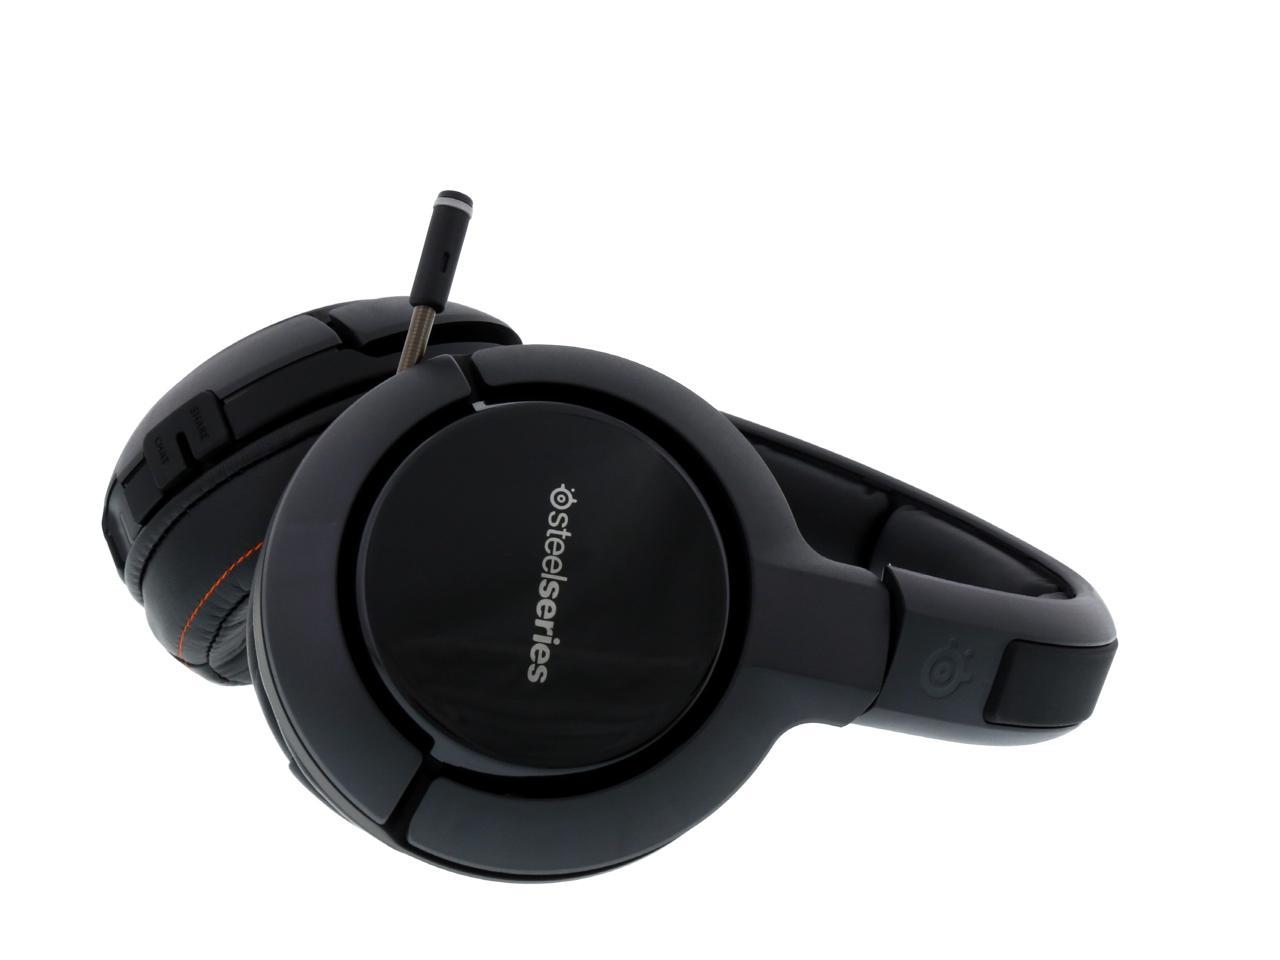 Casque Gaming Dolby 7.1 Surround PC / Mac / Playstation 4 / Mobile / AppleTV / Roku sans fil SteelSeries Siberia 800 